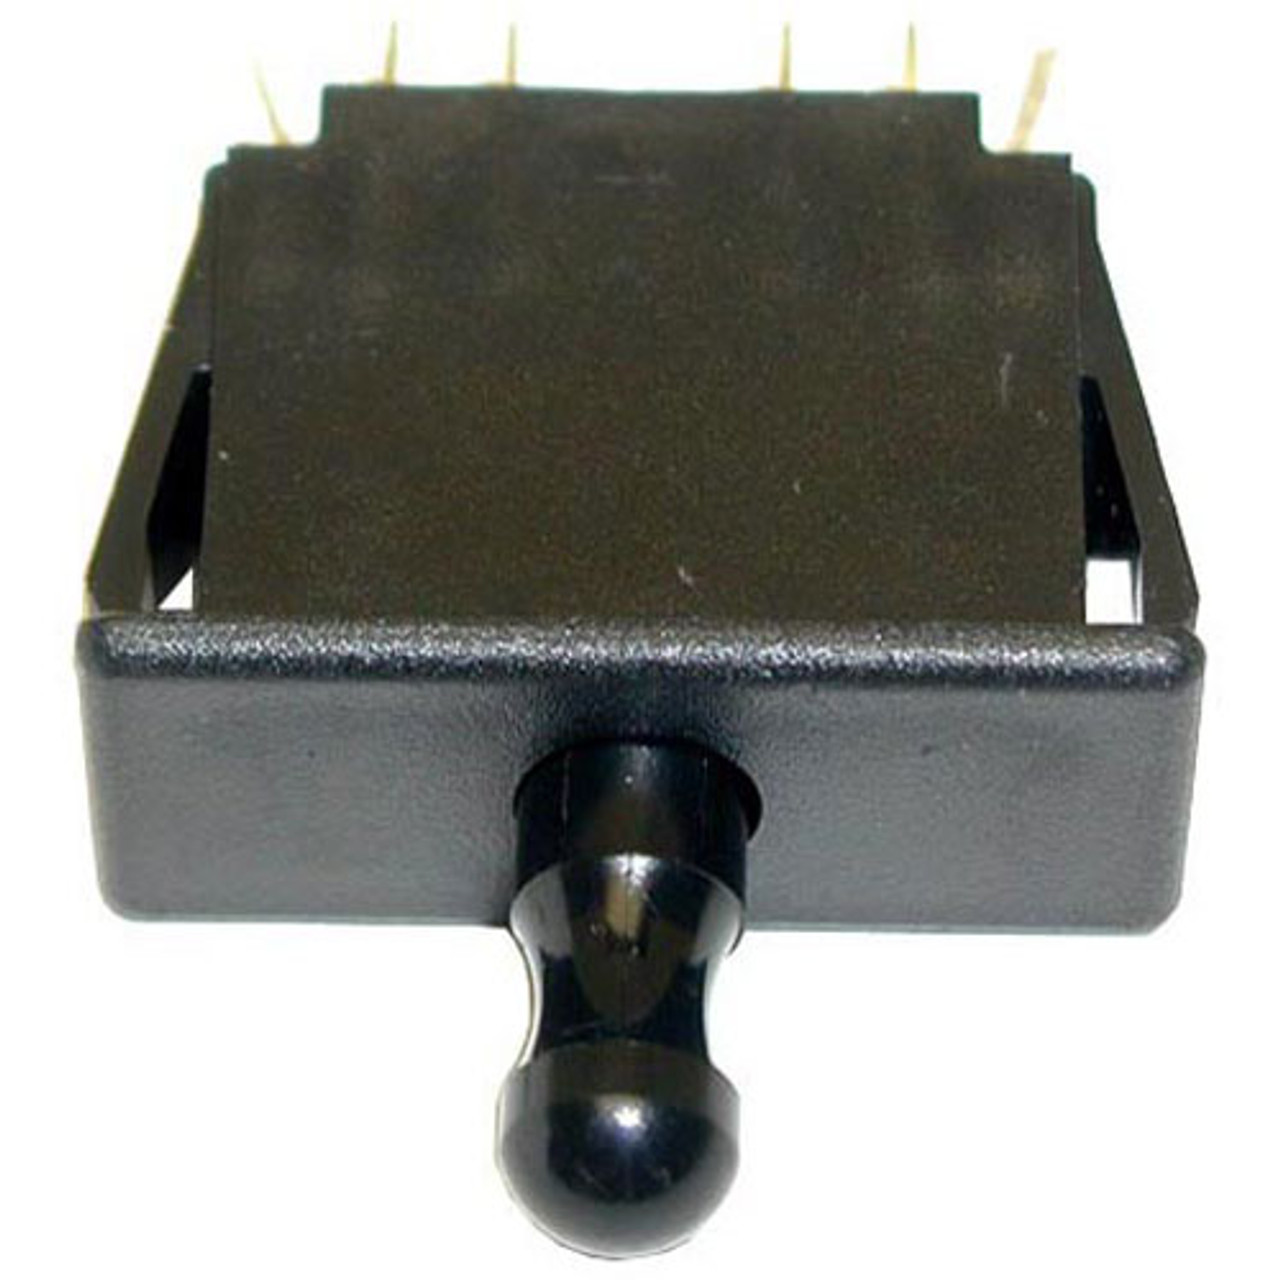 Switch 1/2 X 1-1/2 2 Pole - Replacement Part For Southbend SOU1177566